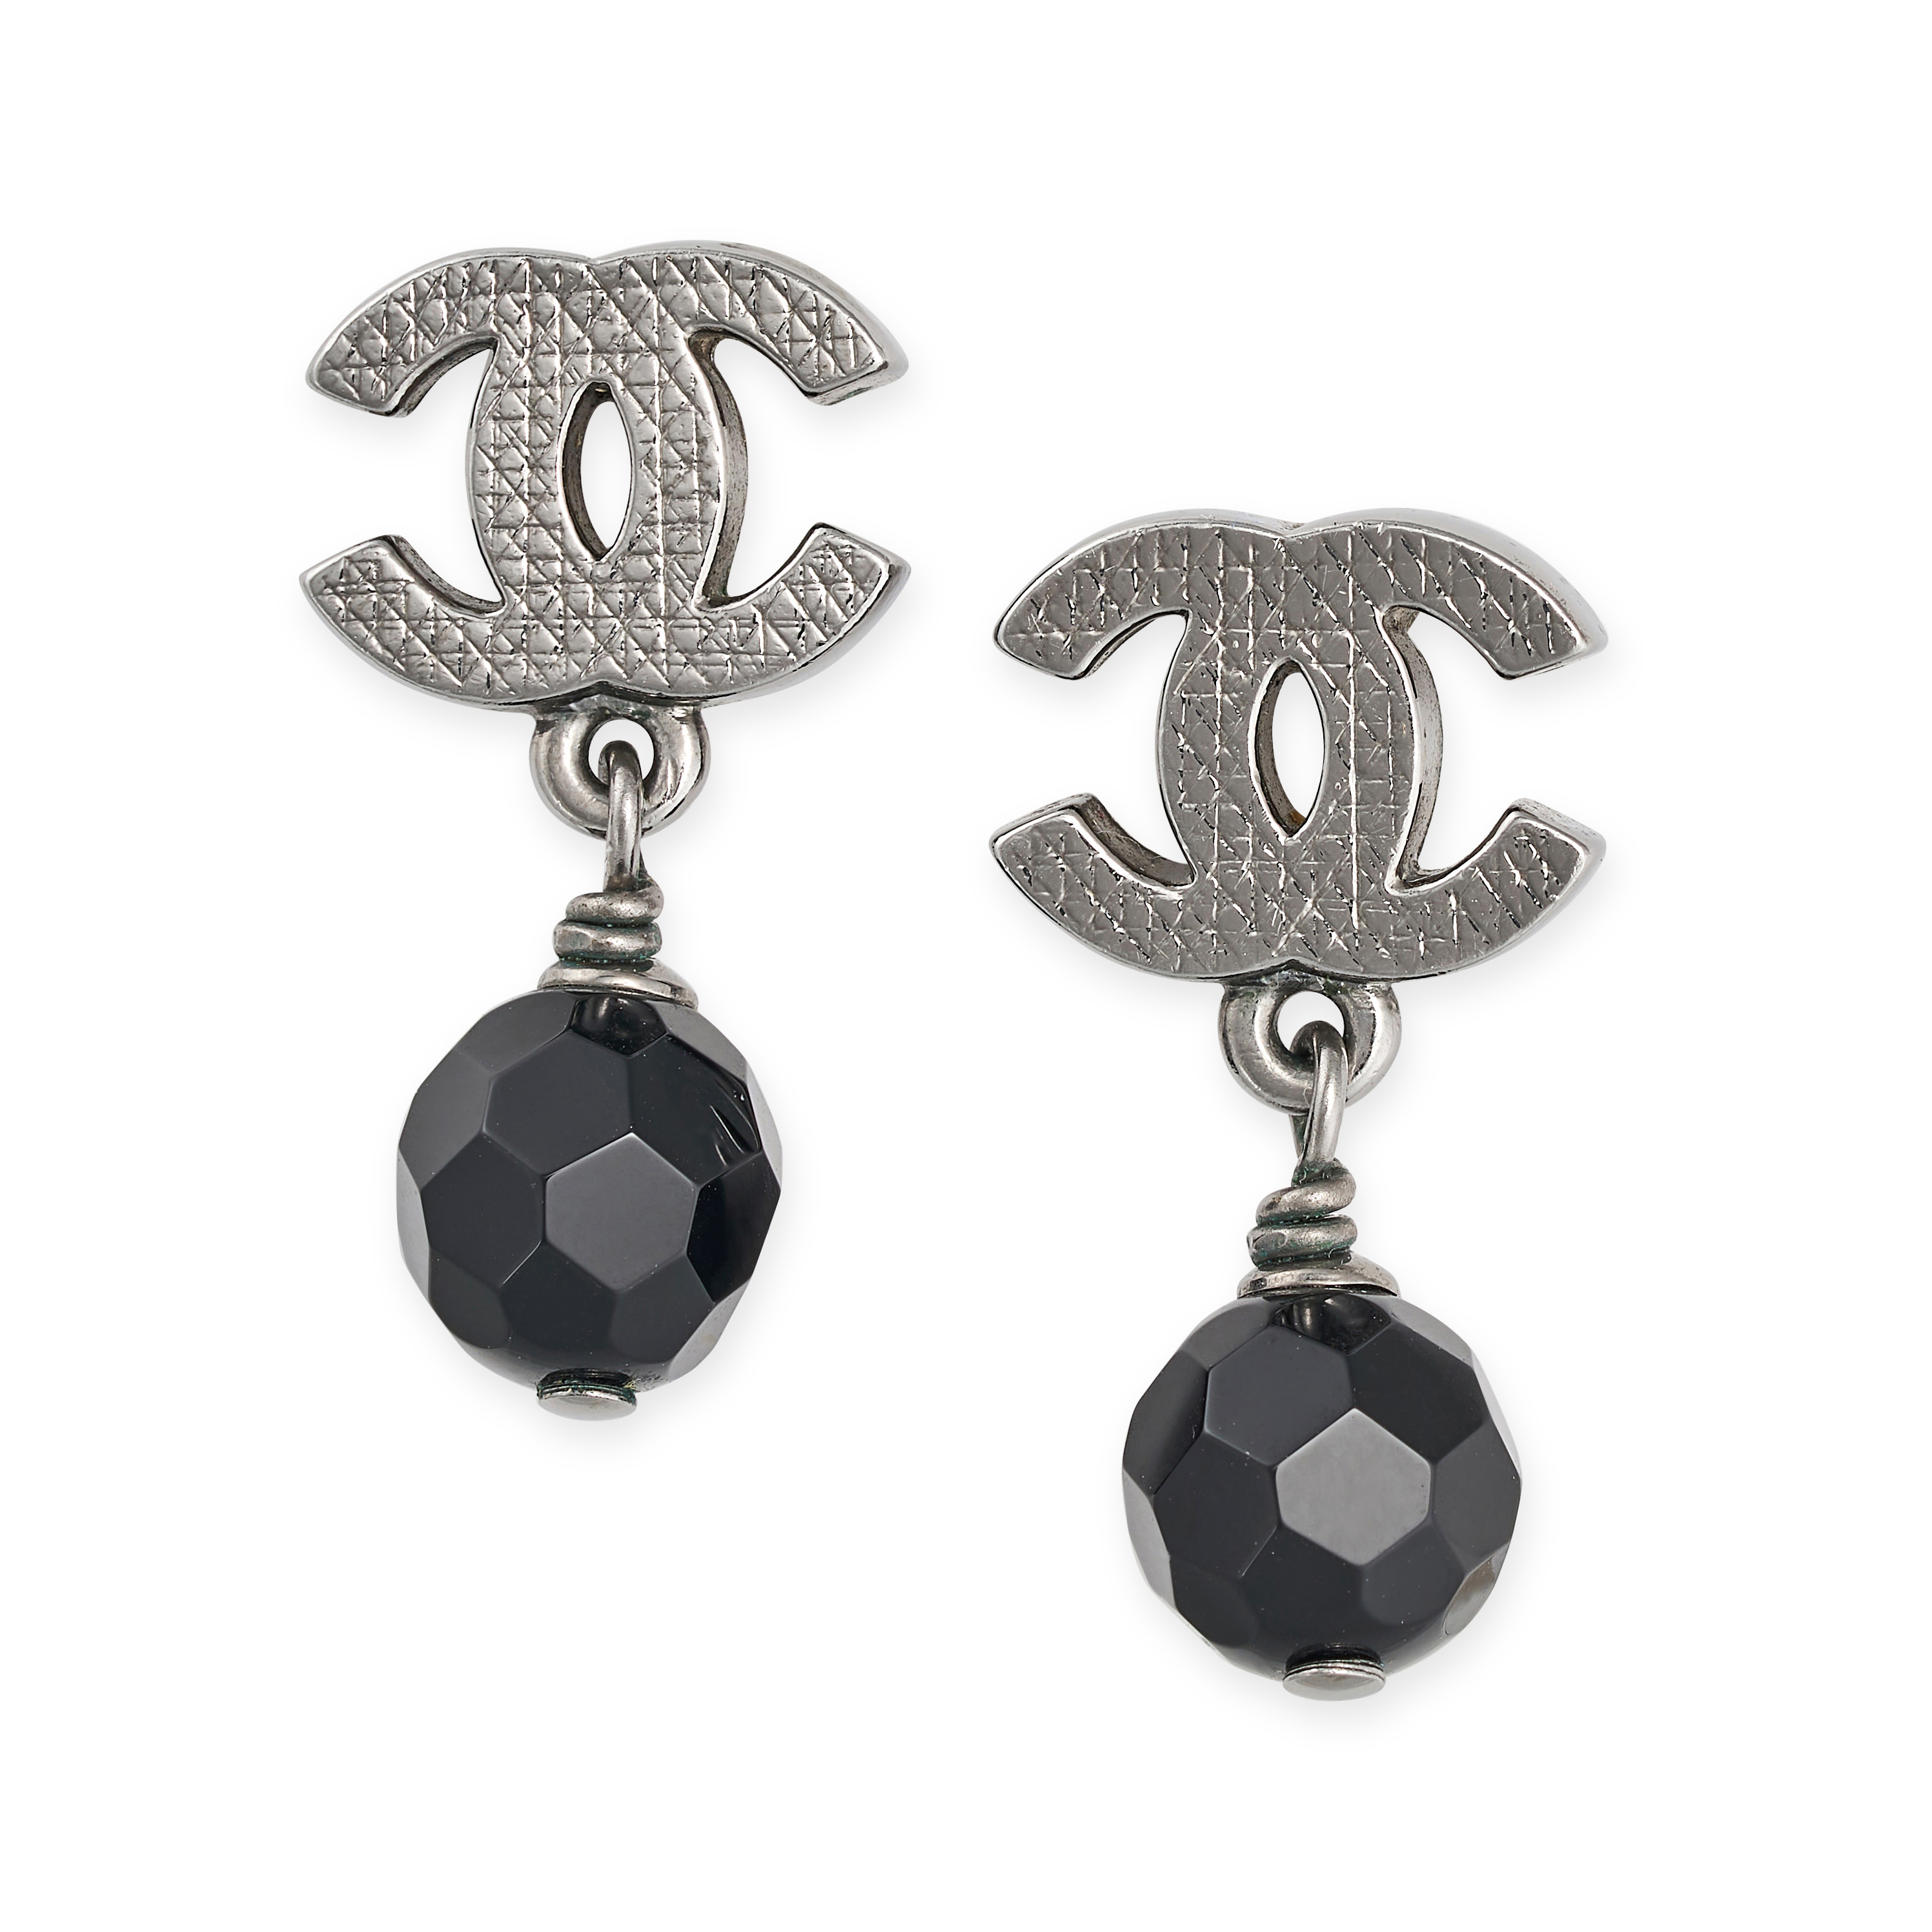 CHANEL, A PAIR OF BLACK BEAD CC EARRINGS in a geometric design, the black bead hanging from a tex...